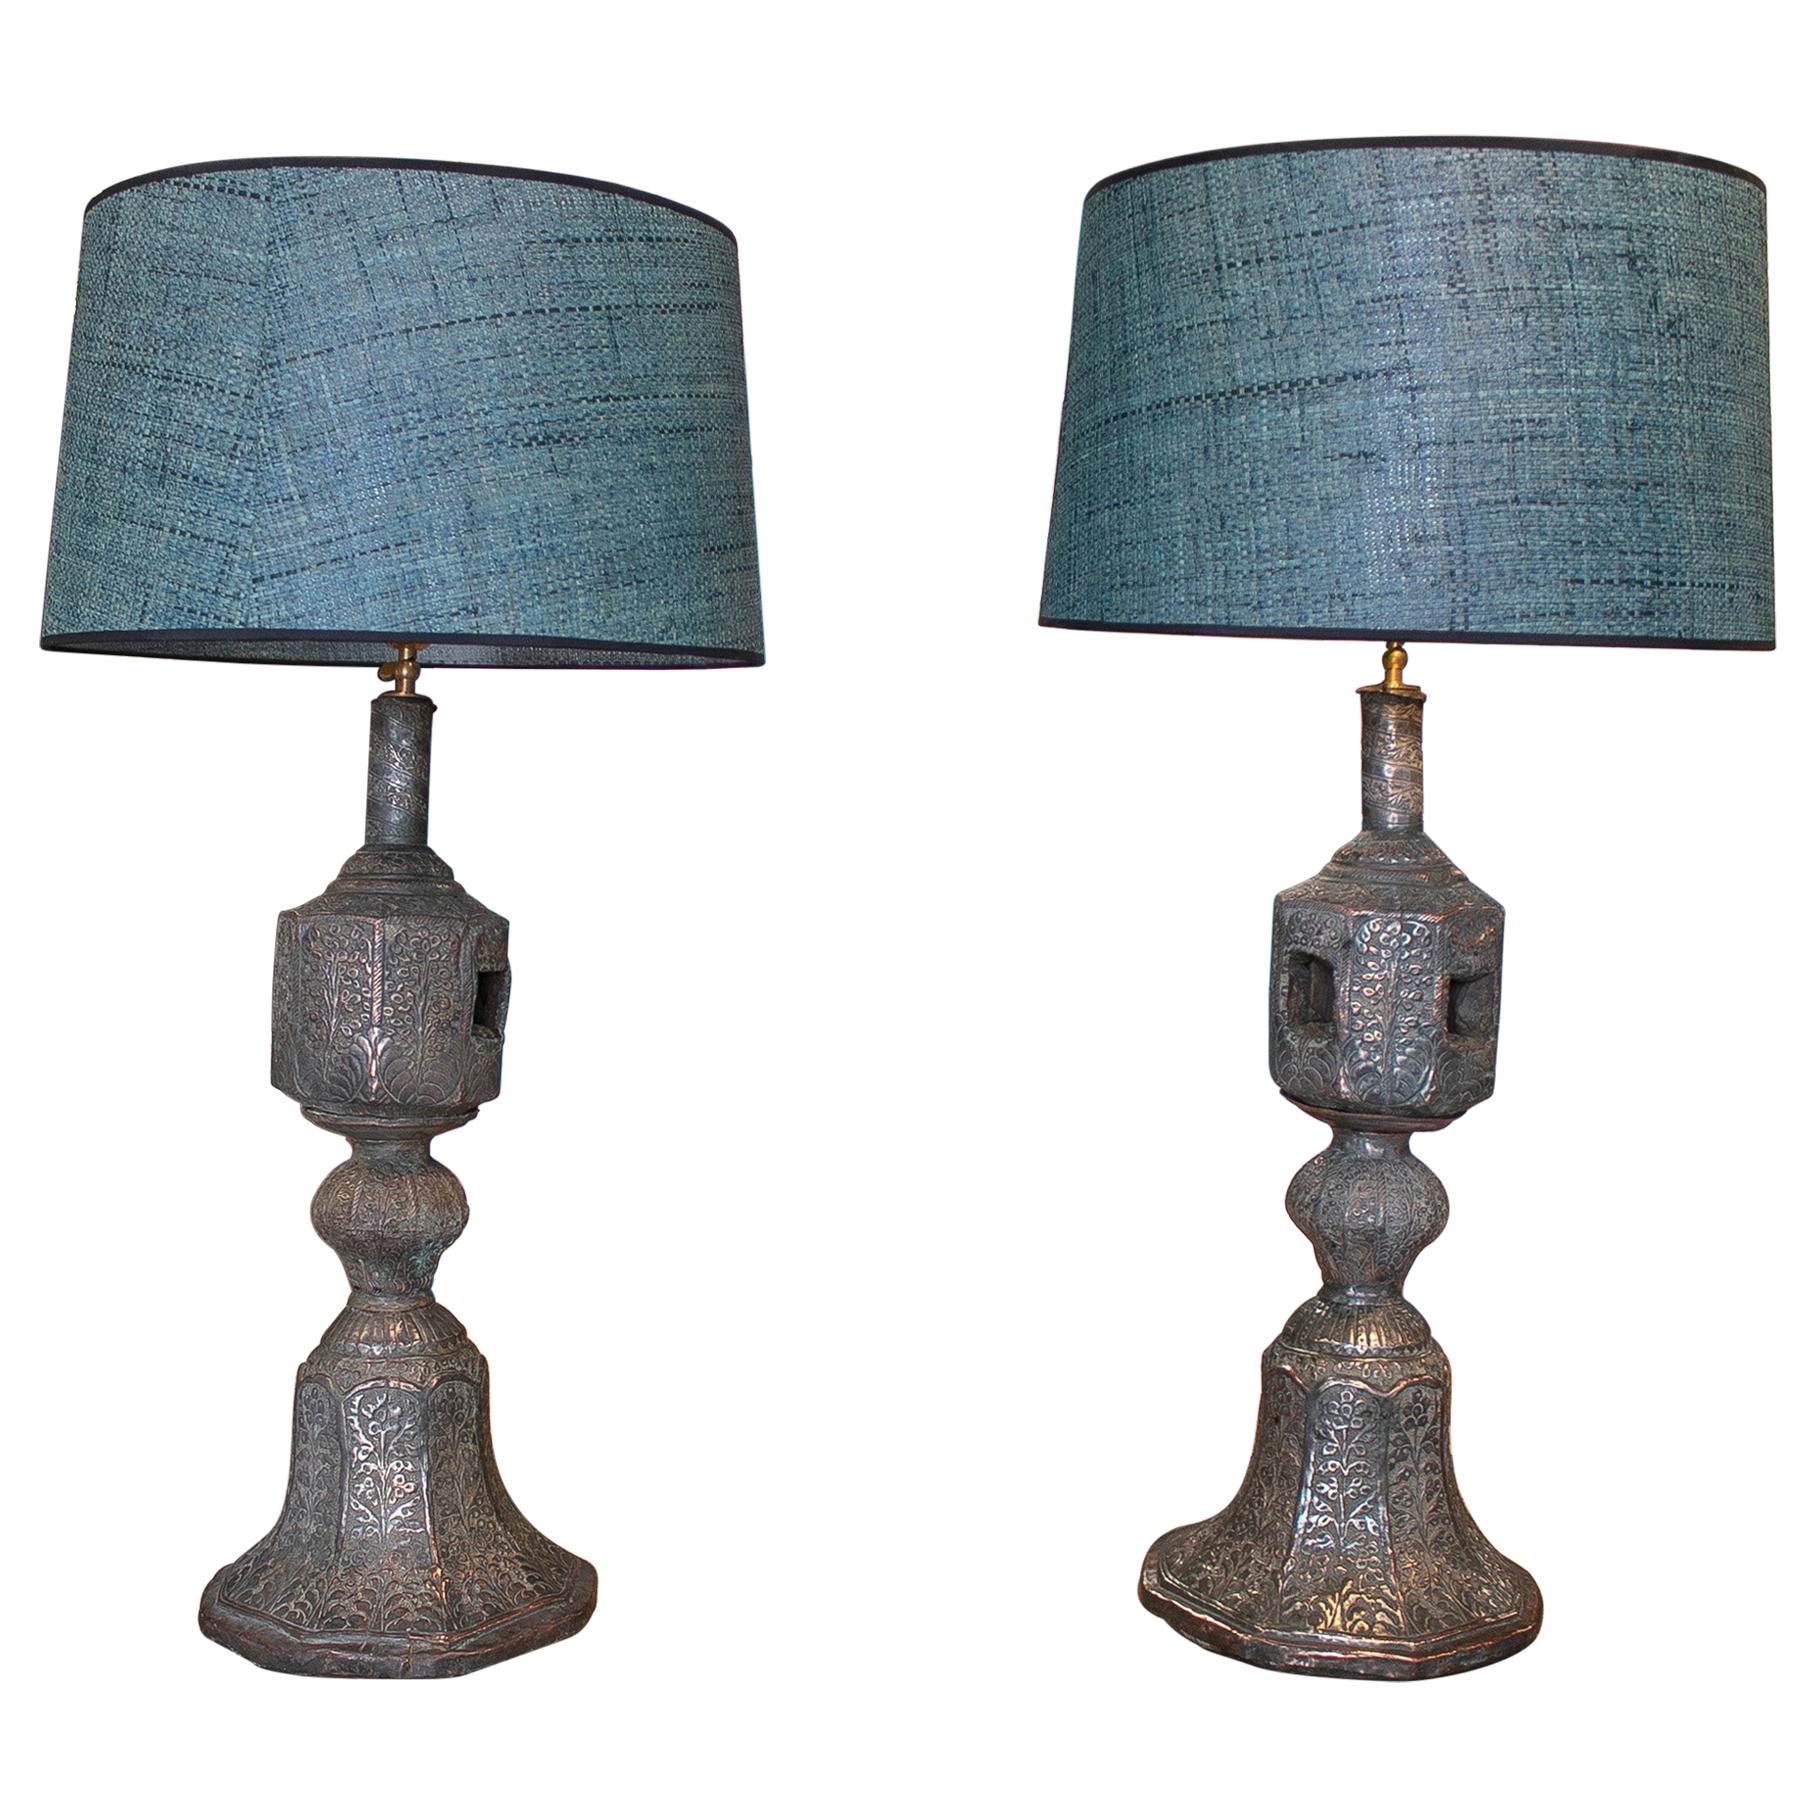 Pair of 1920s Indian Silvered Metal Bed Legs Turned Table Lamps